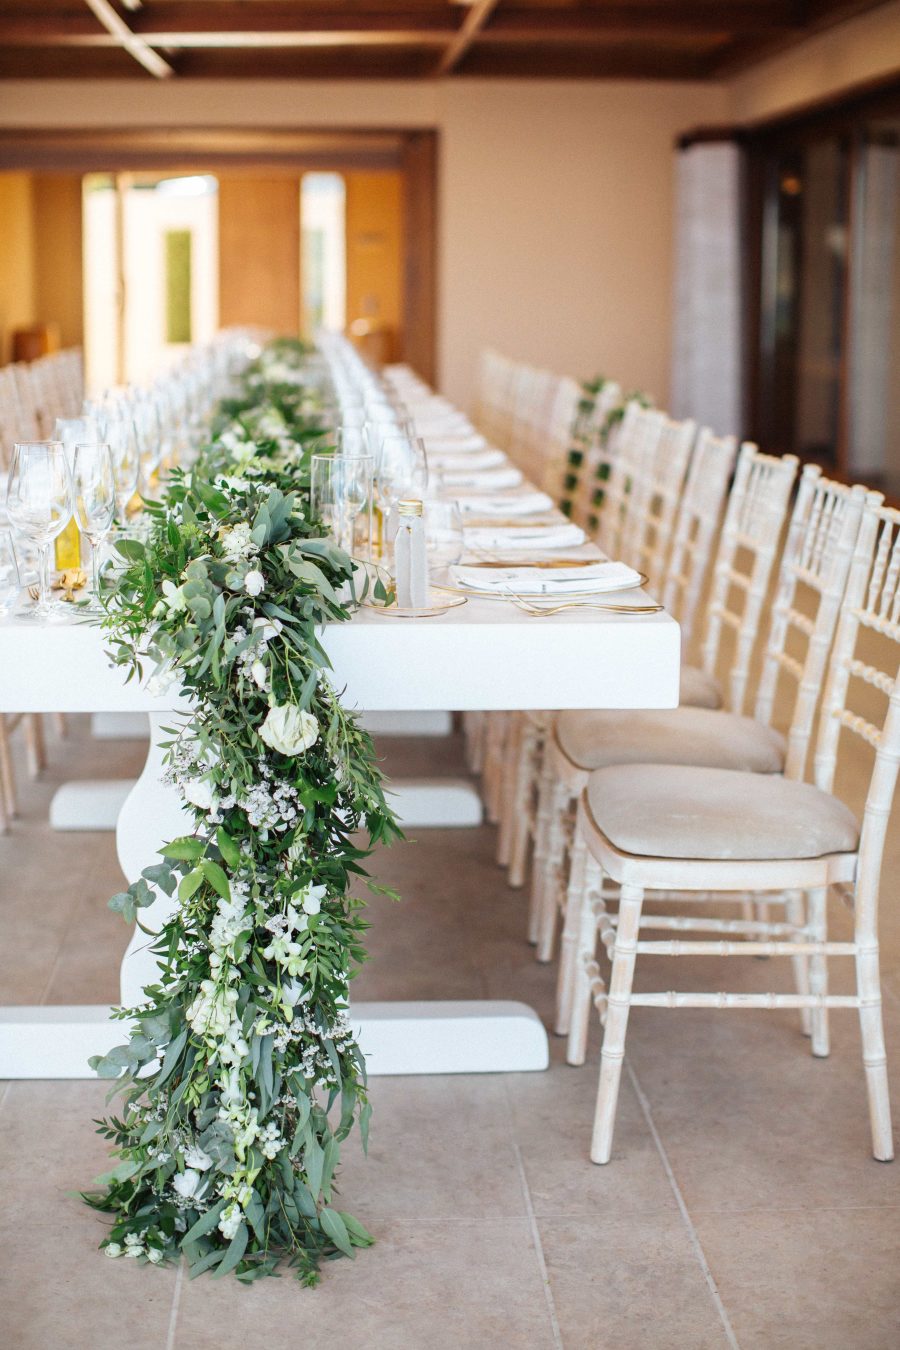 The wedding table runners were lush and extra long to add chic to the reception